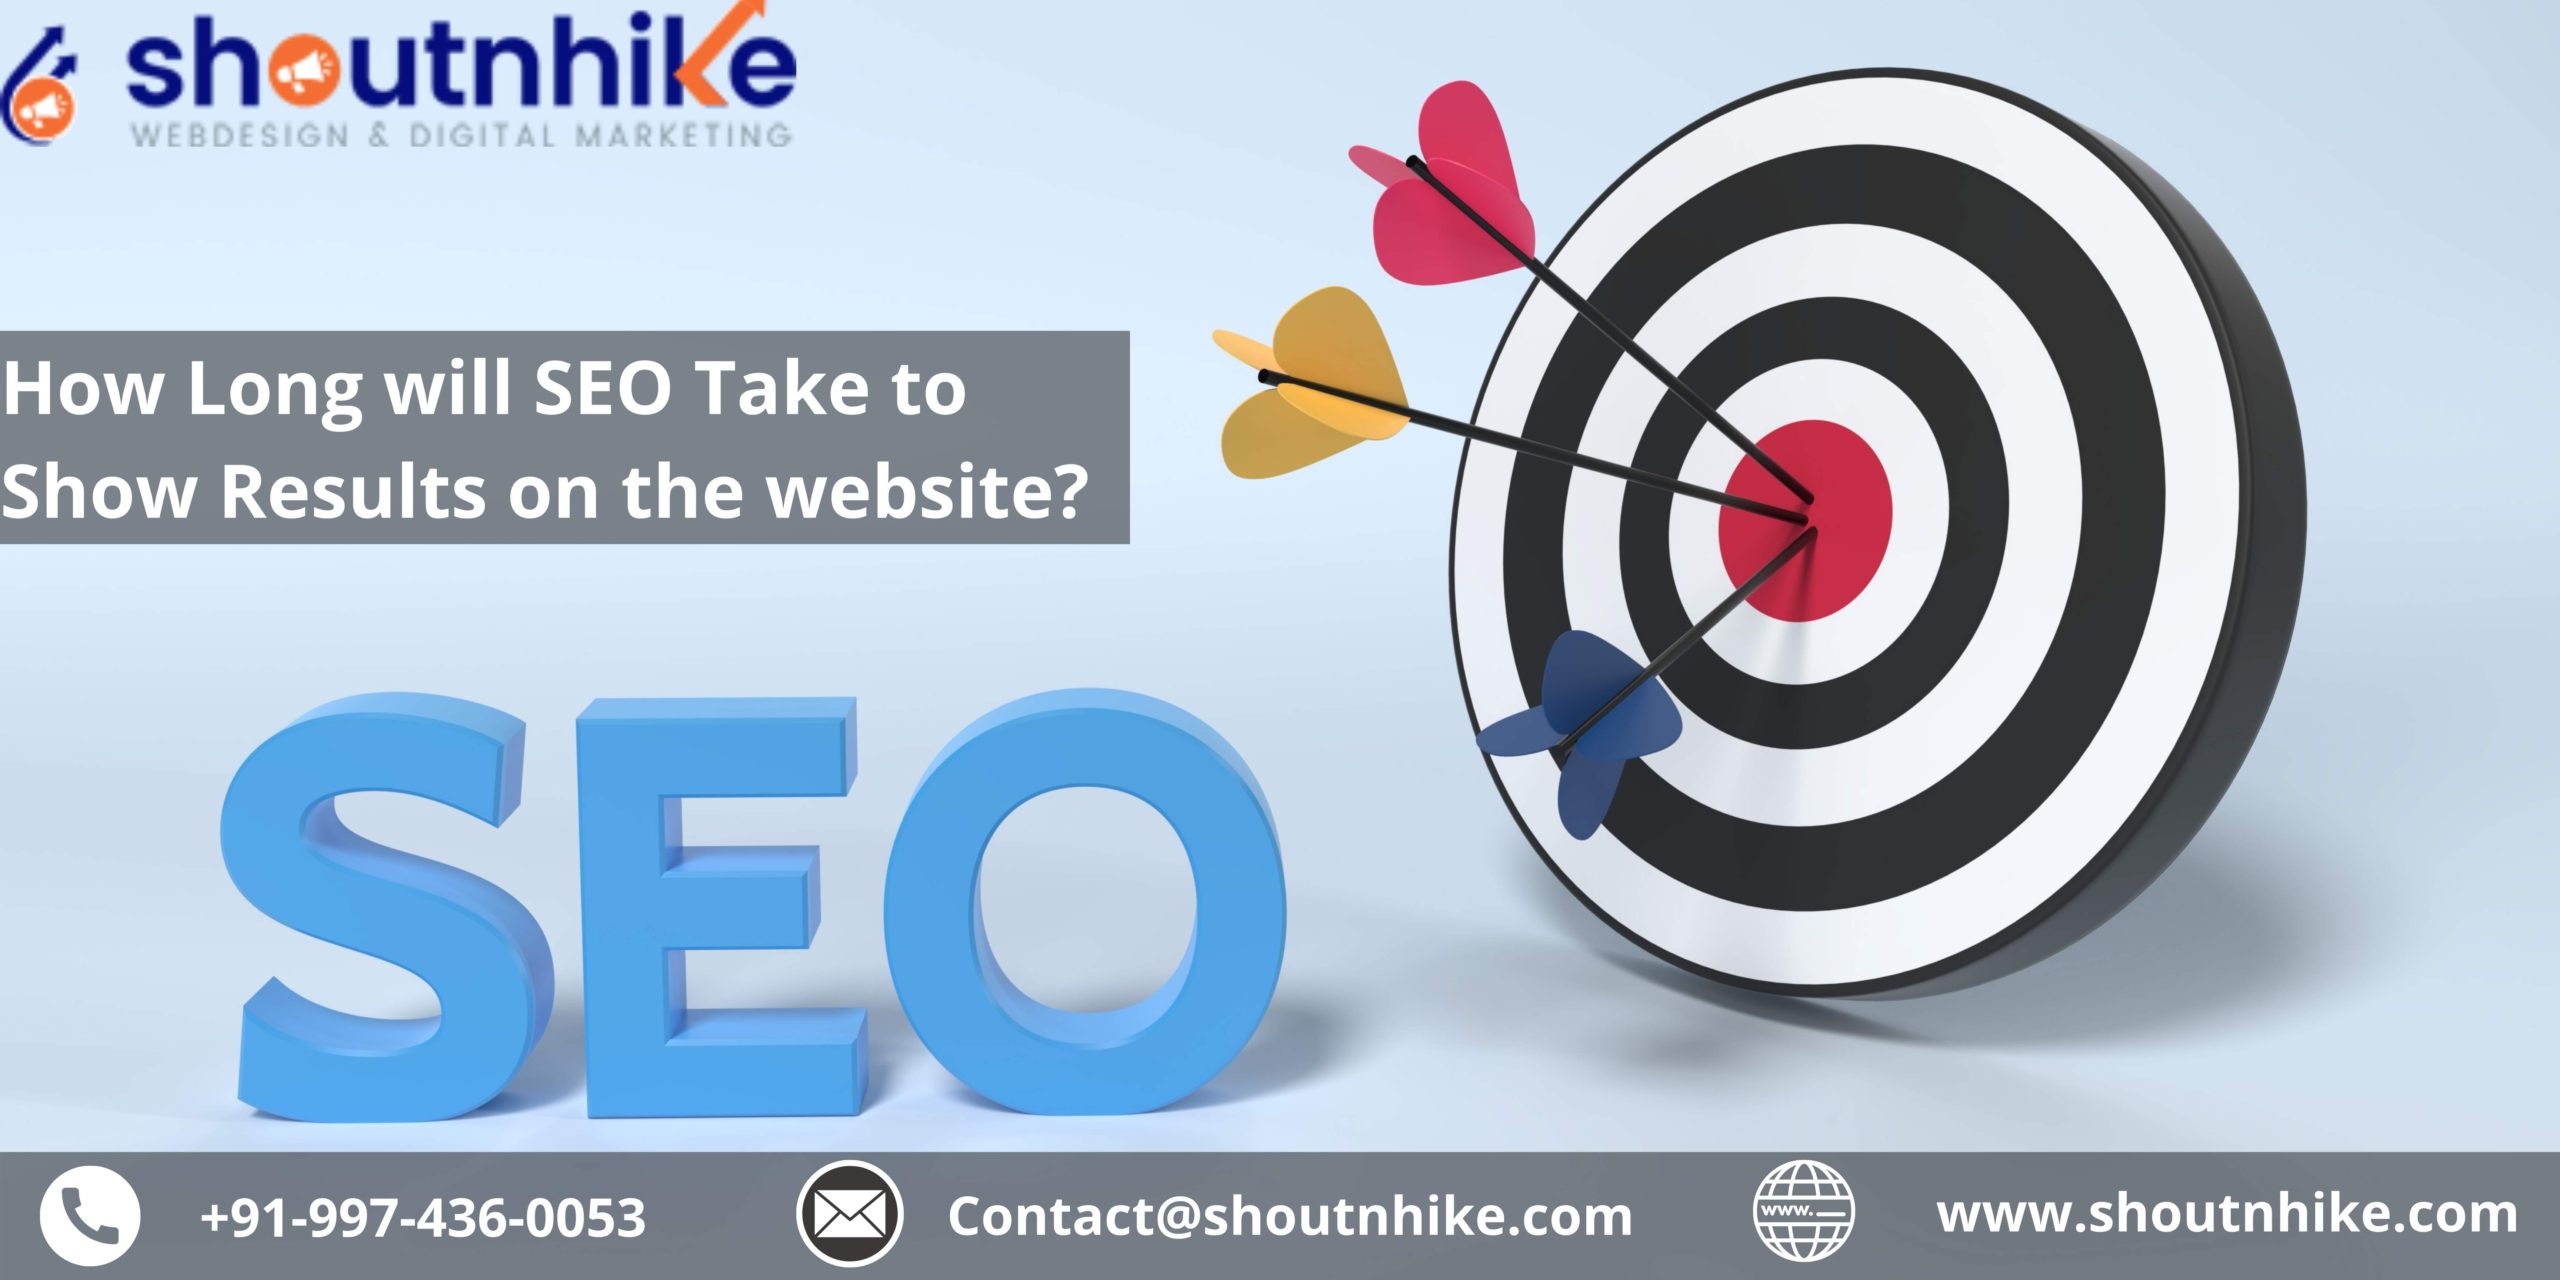 How Long will SEO Take to Show Results on the website